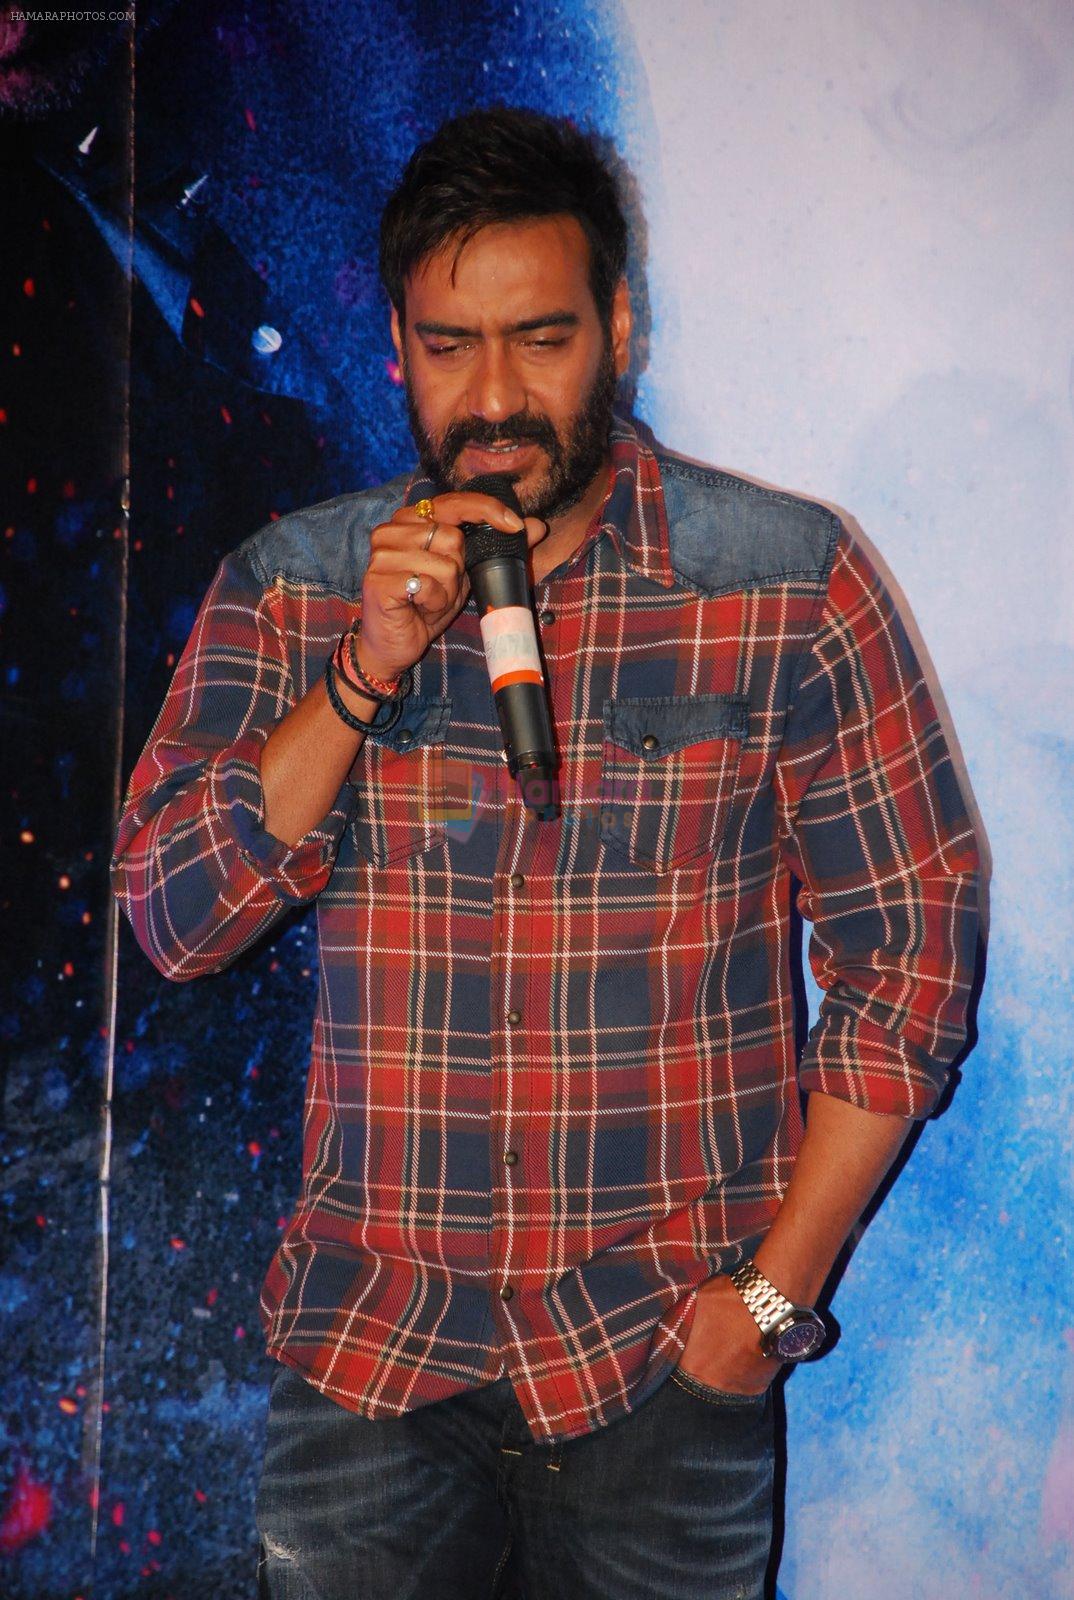 Ajay Devgn at the Launch of Gangster Baby song from Action Jackson in PVR, Mumbai on 21st Nov 2014